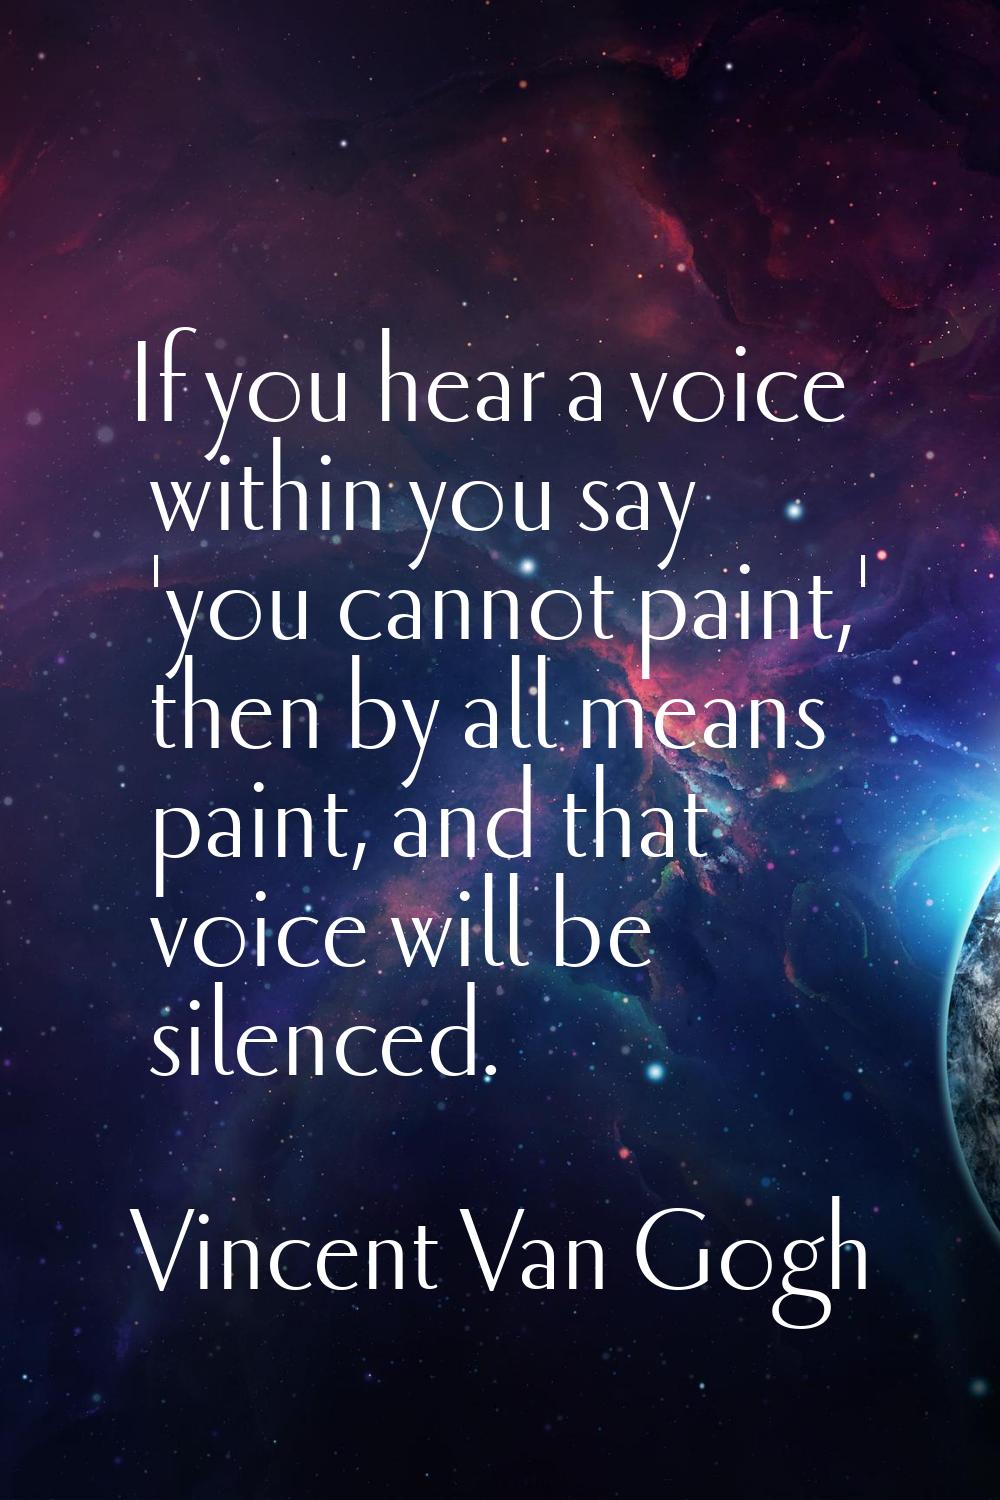 If you hear a voice within you say 'you cannot paint,' then by all means paint, and that voice will